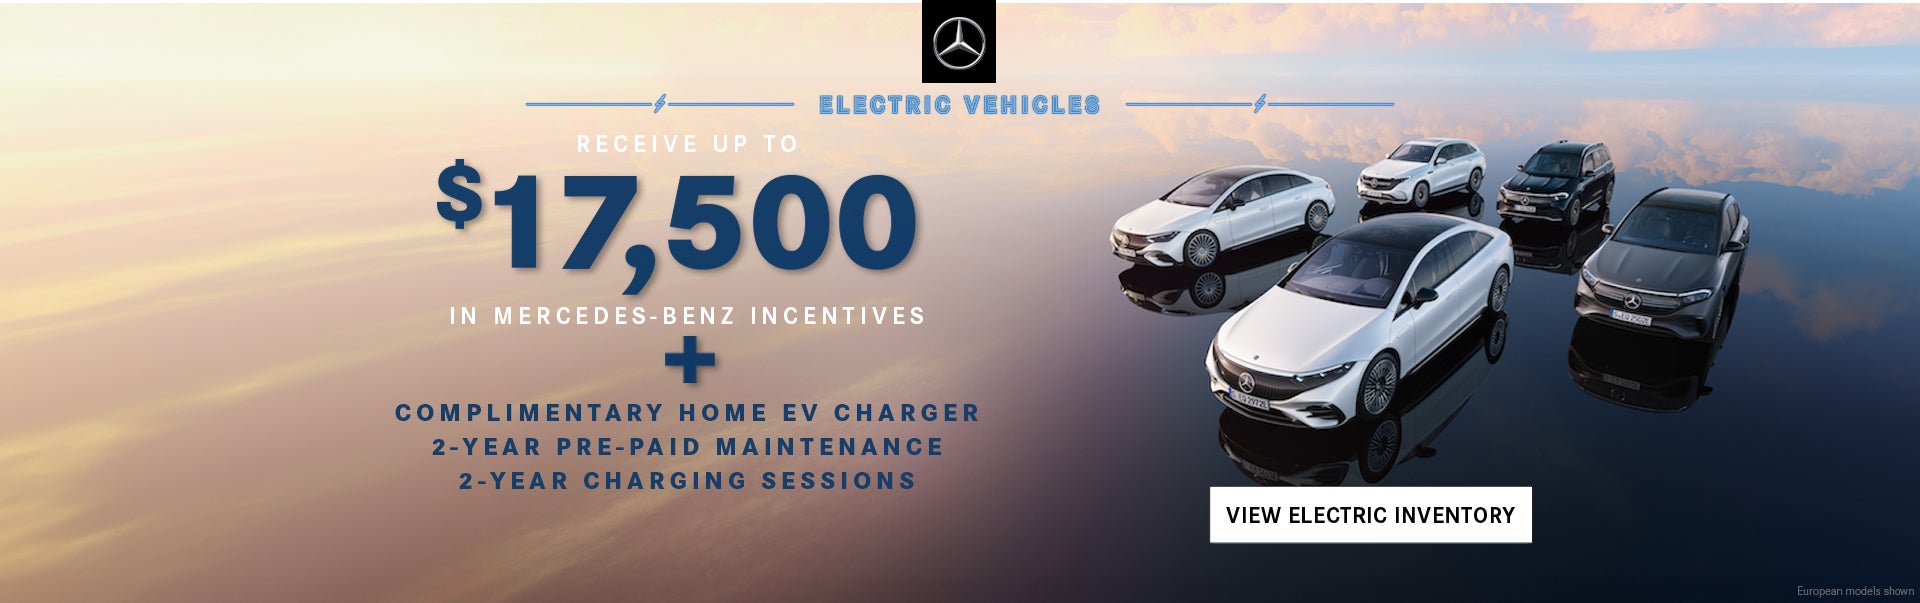 mercedes EQ electric vehicle special discount offer